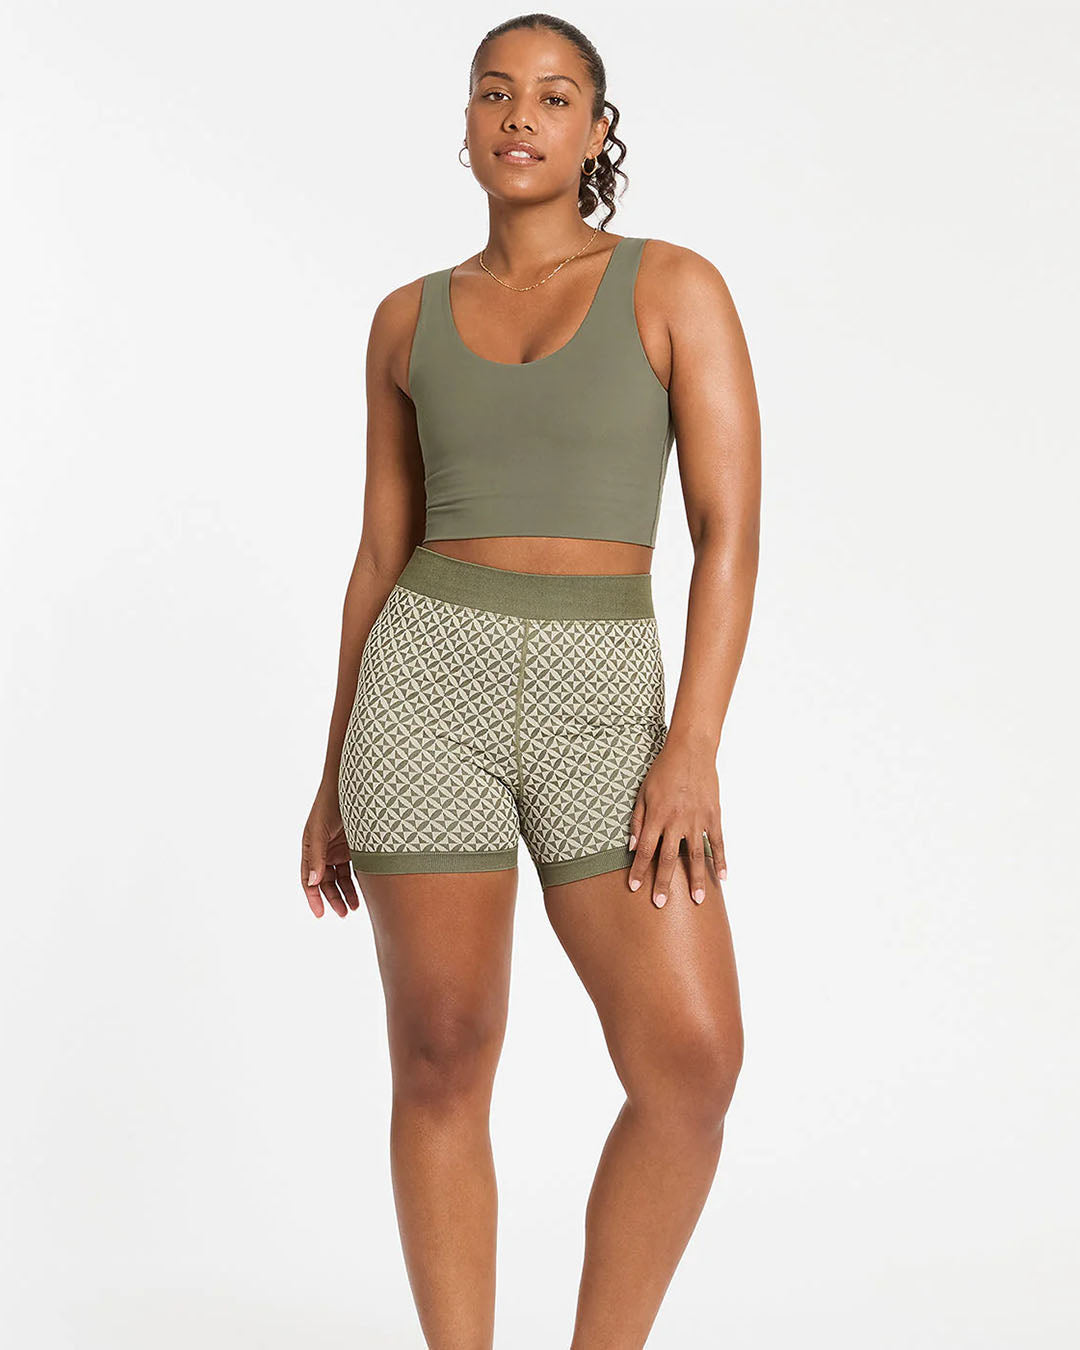 In Motion Scoop Bra - Dusty Olive Sports Bras &amp; Crops by Nimble - Prae Store